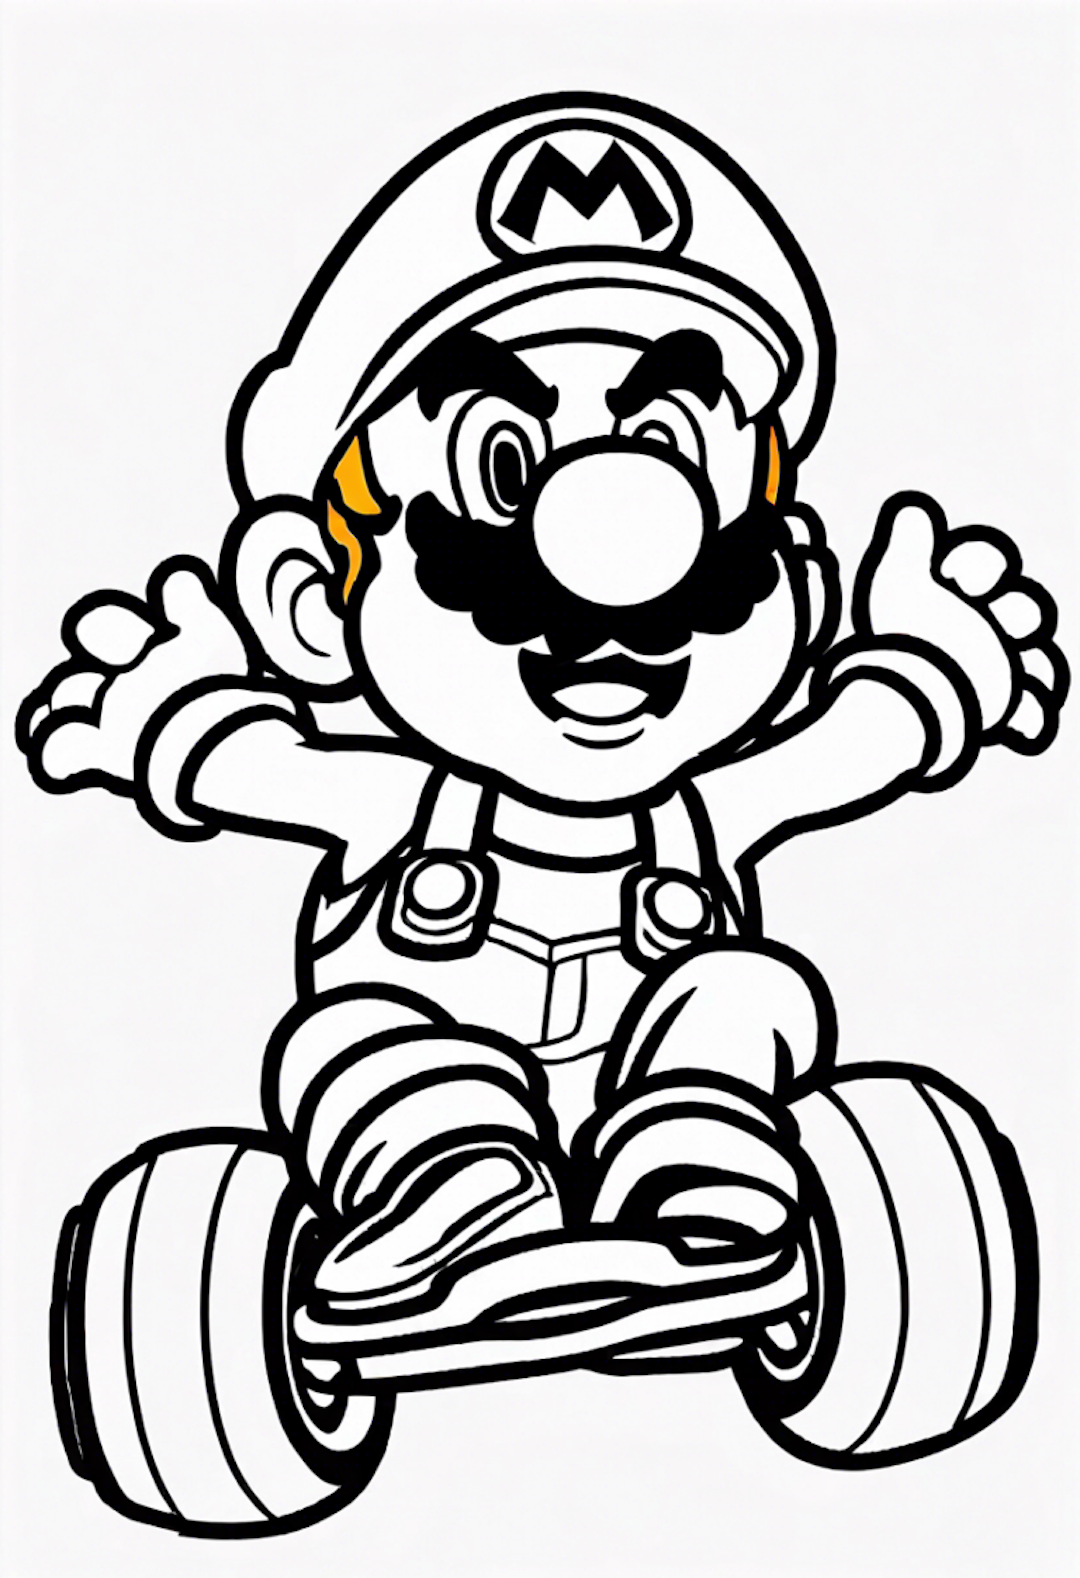 Mario on a Go-Kart Adventure Coloring Page coloring pages